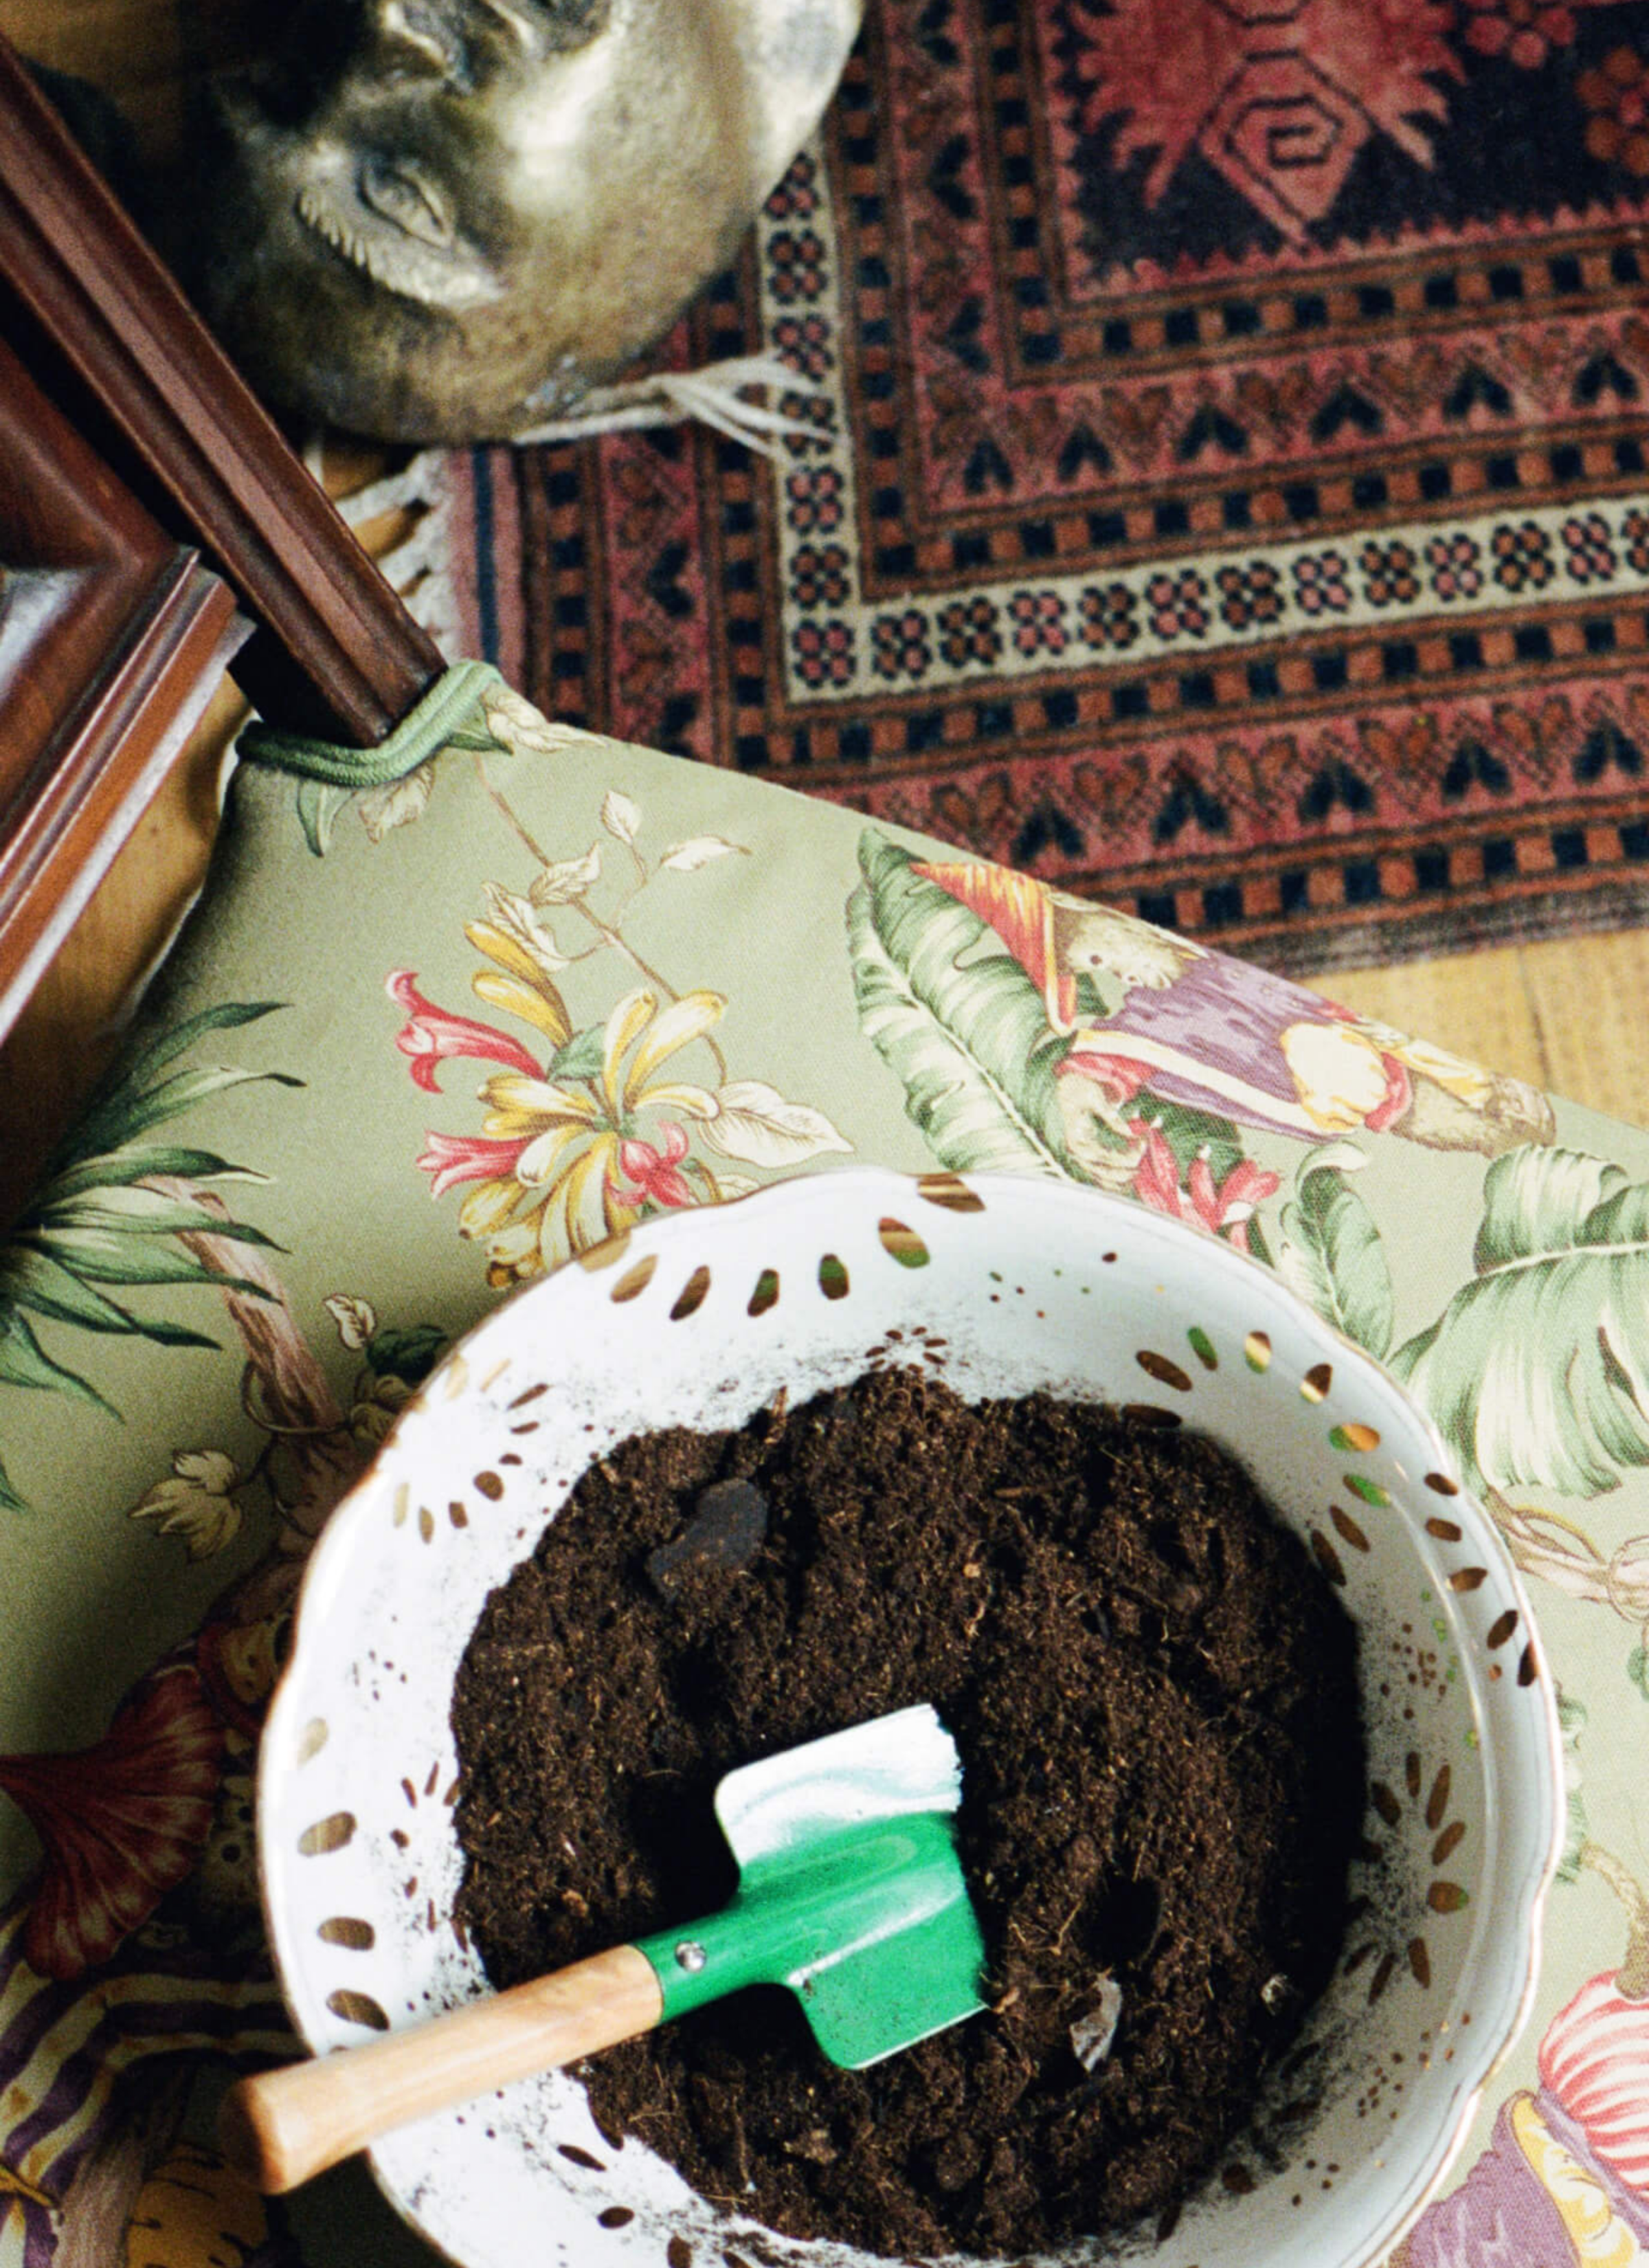 A bowl filled with soil and a trowel left on the chair that has a floral cover.